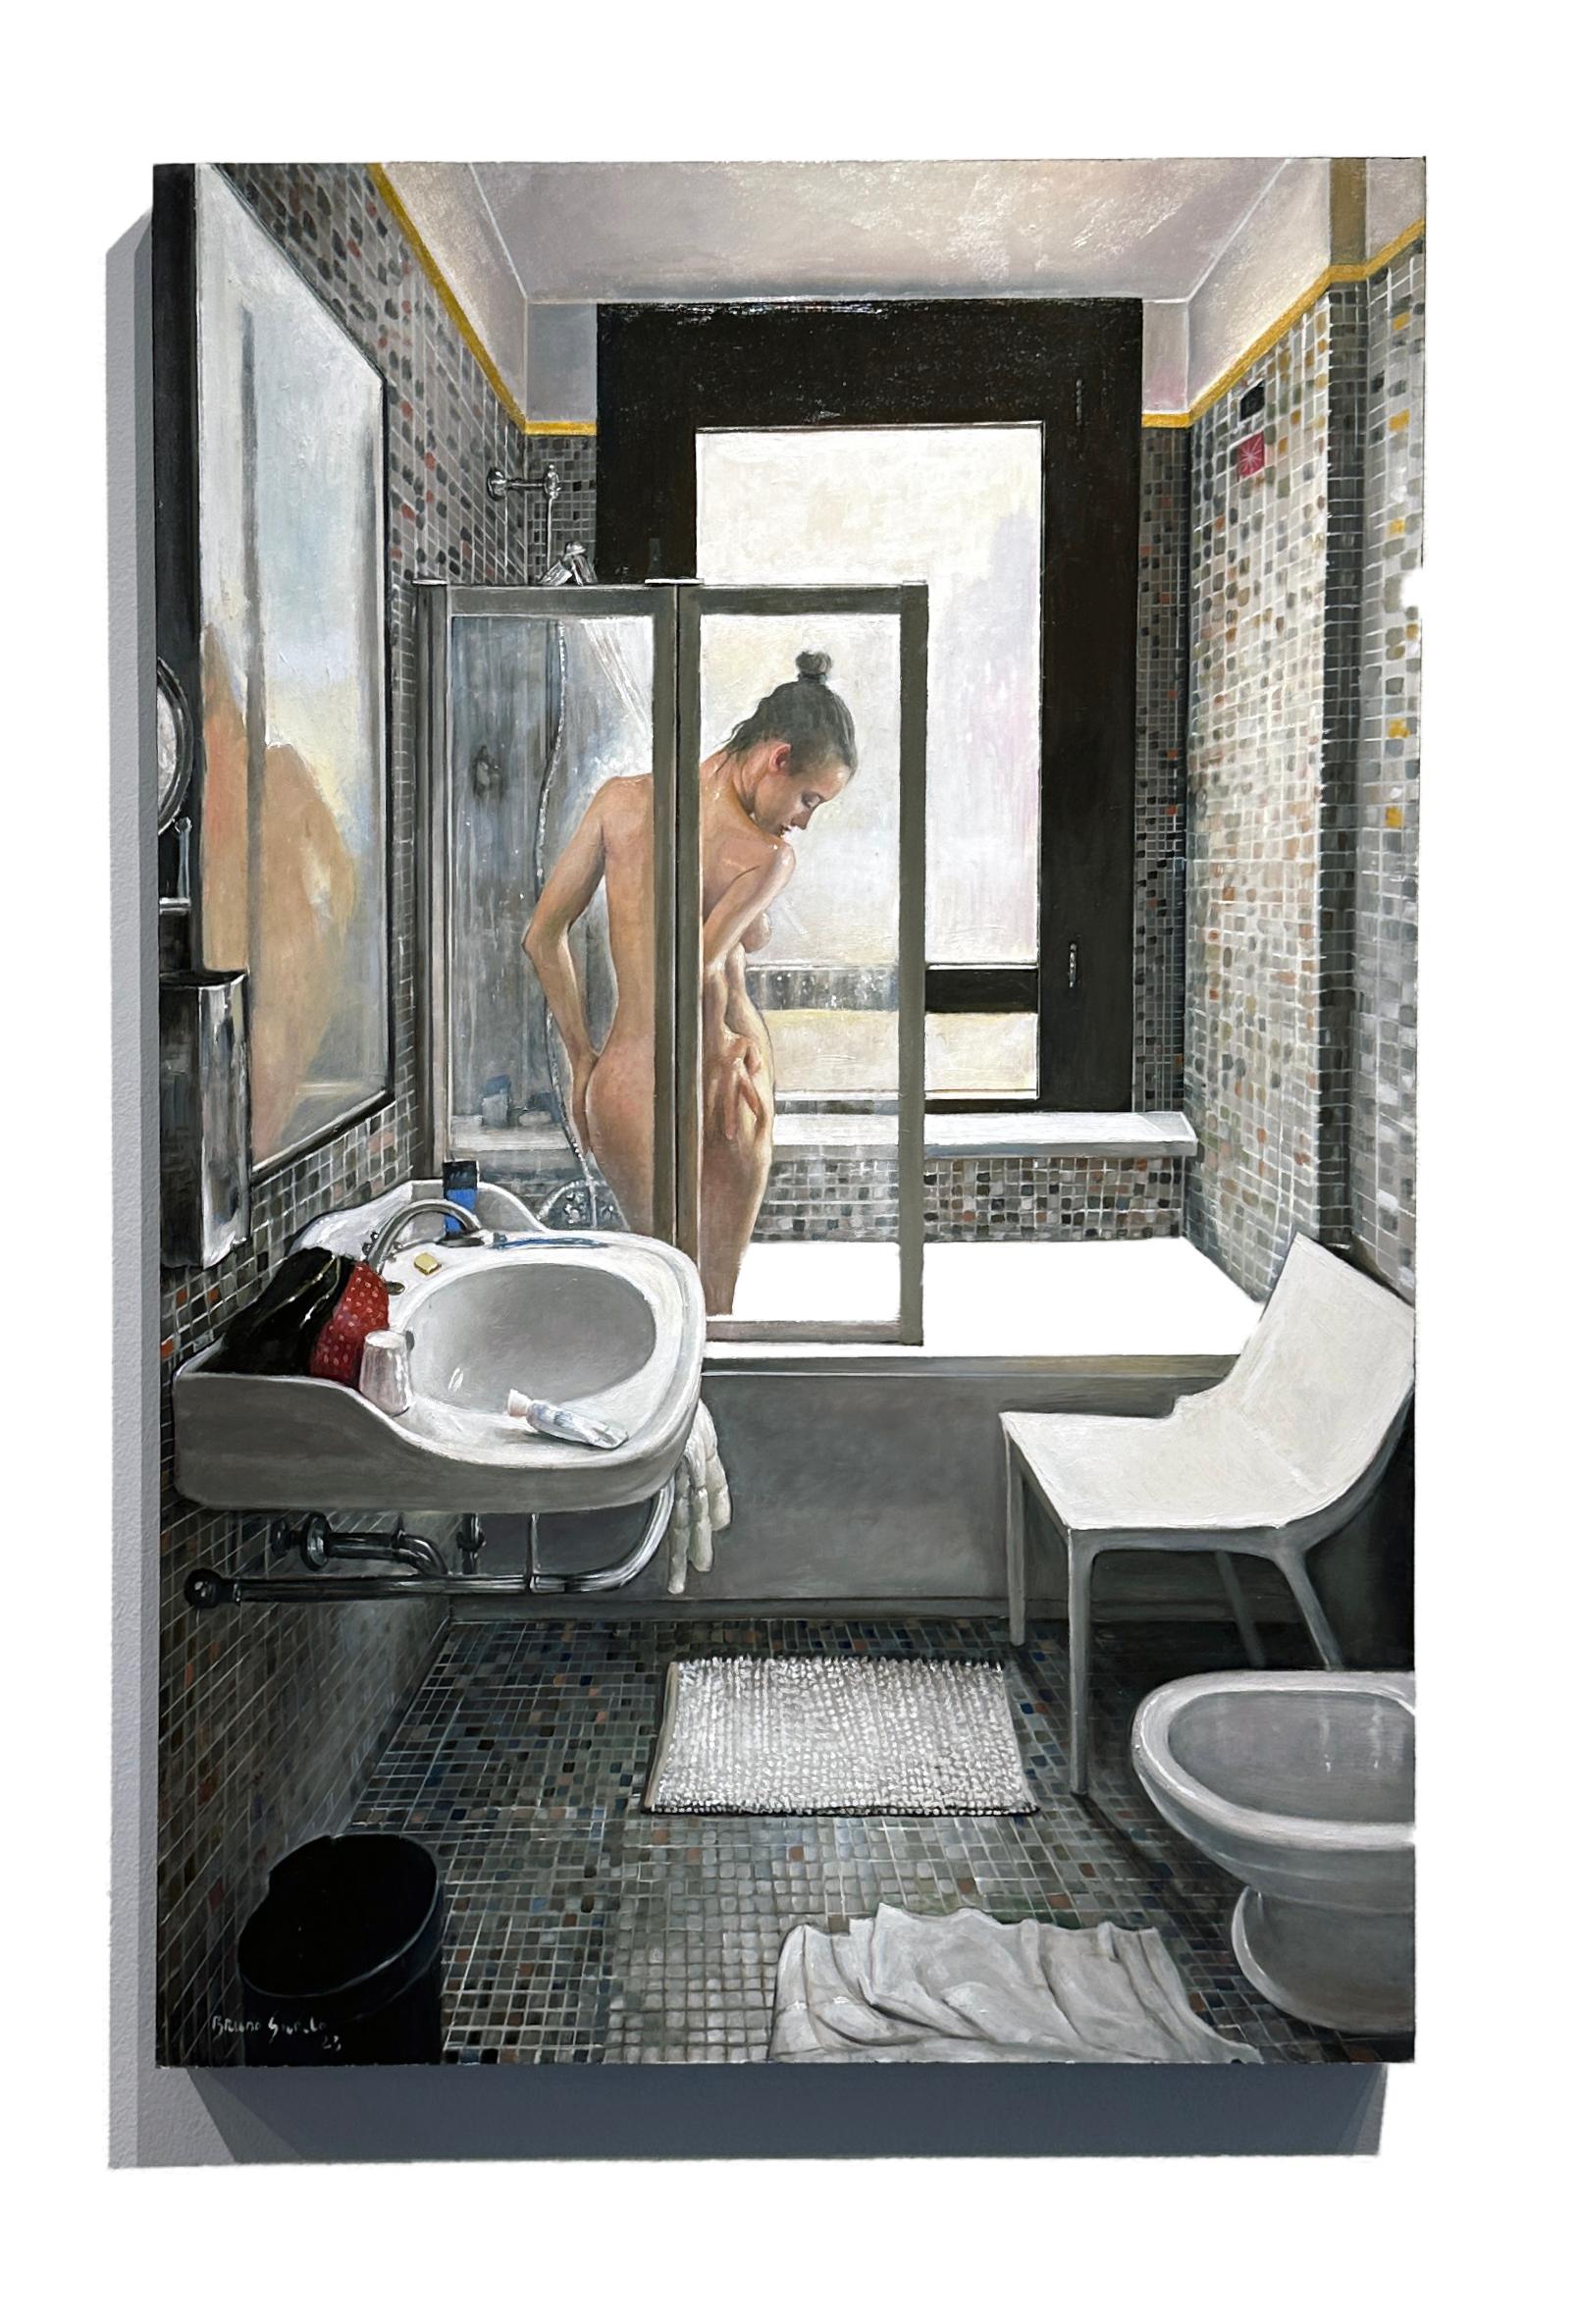 An unsuspecting woman showers in a small tiled bath somewhere in Venice.  This intimate portrait is painted on panel with a black trimmed edges therefore not requiring framing.  Please contact the gallery for framing options.

Bruno Surdo
Venetian